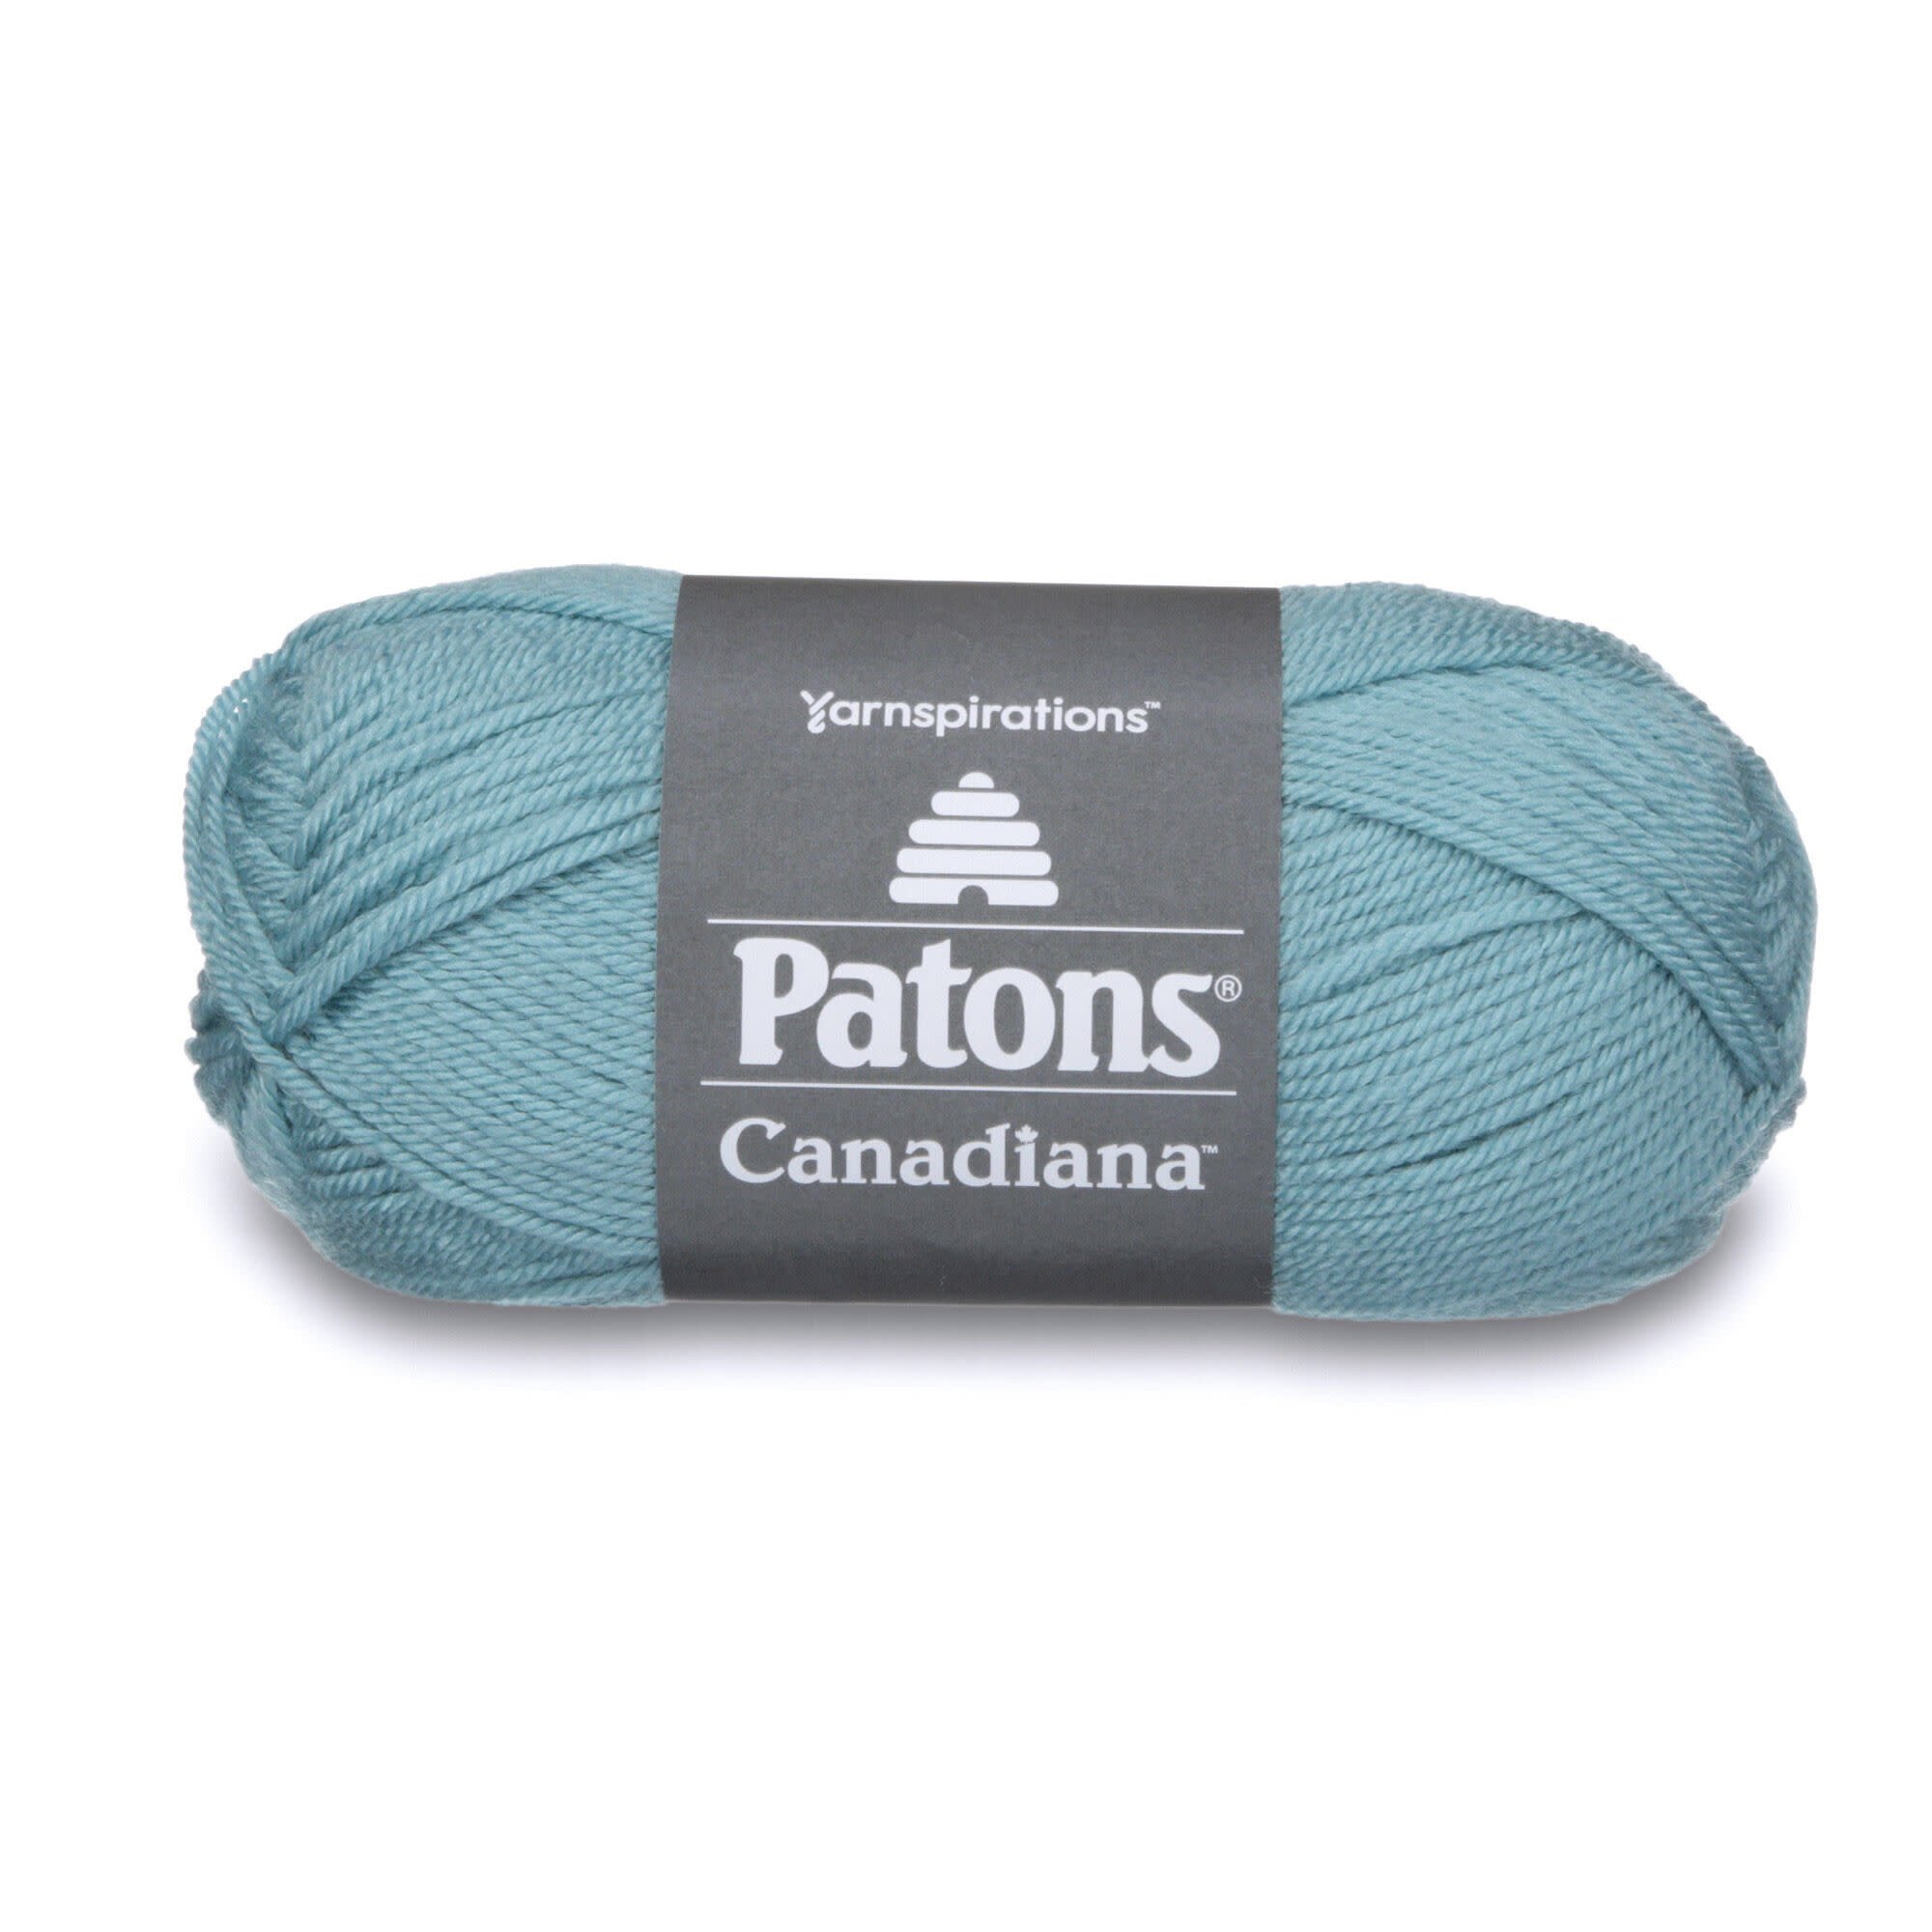 Patons Canadiana - Pale Teal /743